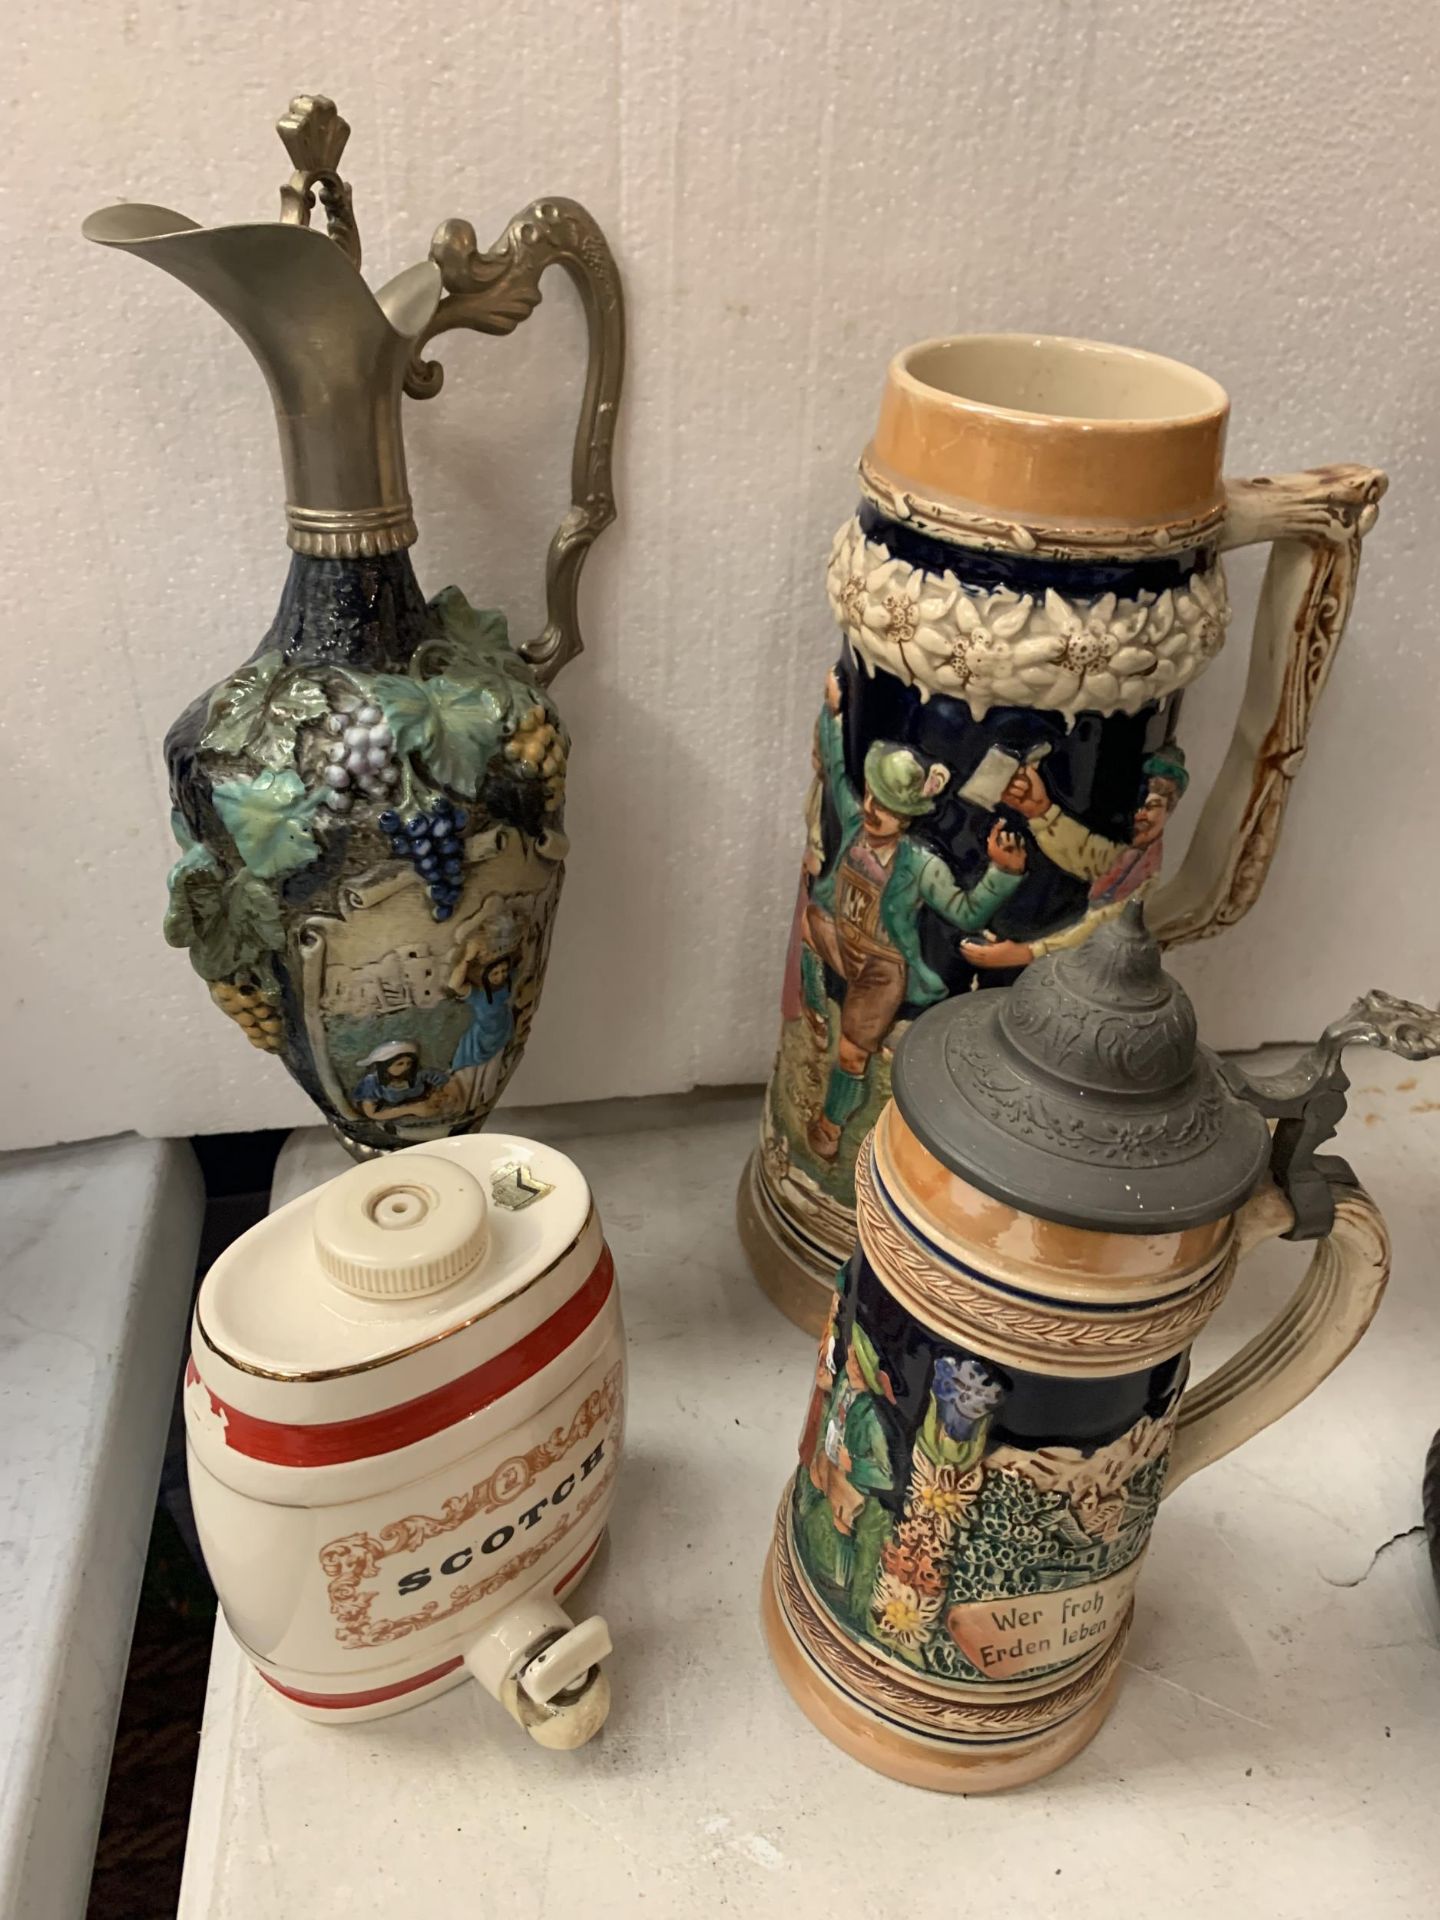 A COLLECTION OF FOUR 'DRINKS' CERAMICS TO INCLUDE A STEIN DRINKING VESSEL, A ROYAL VICTORIA WADE